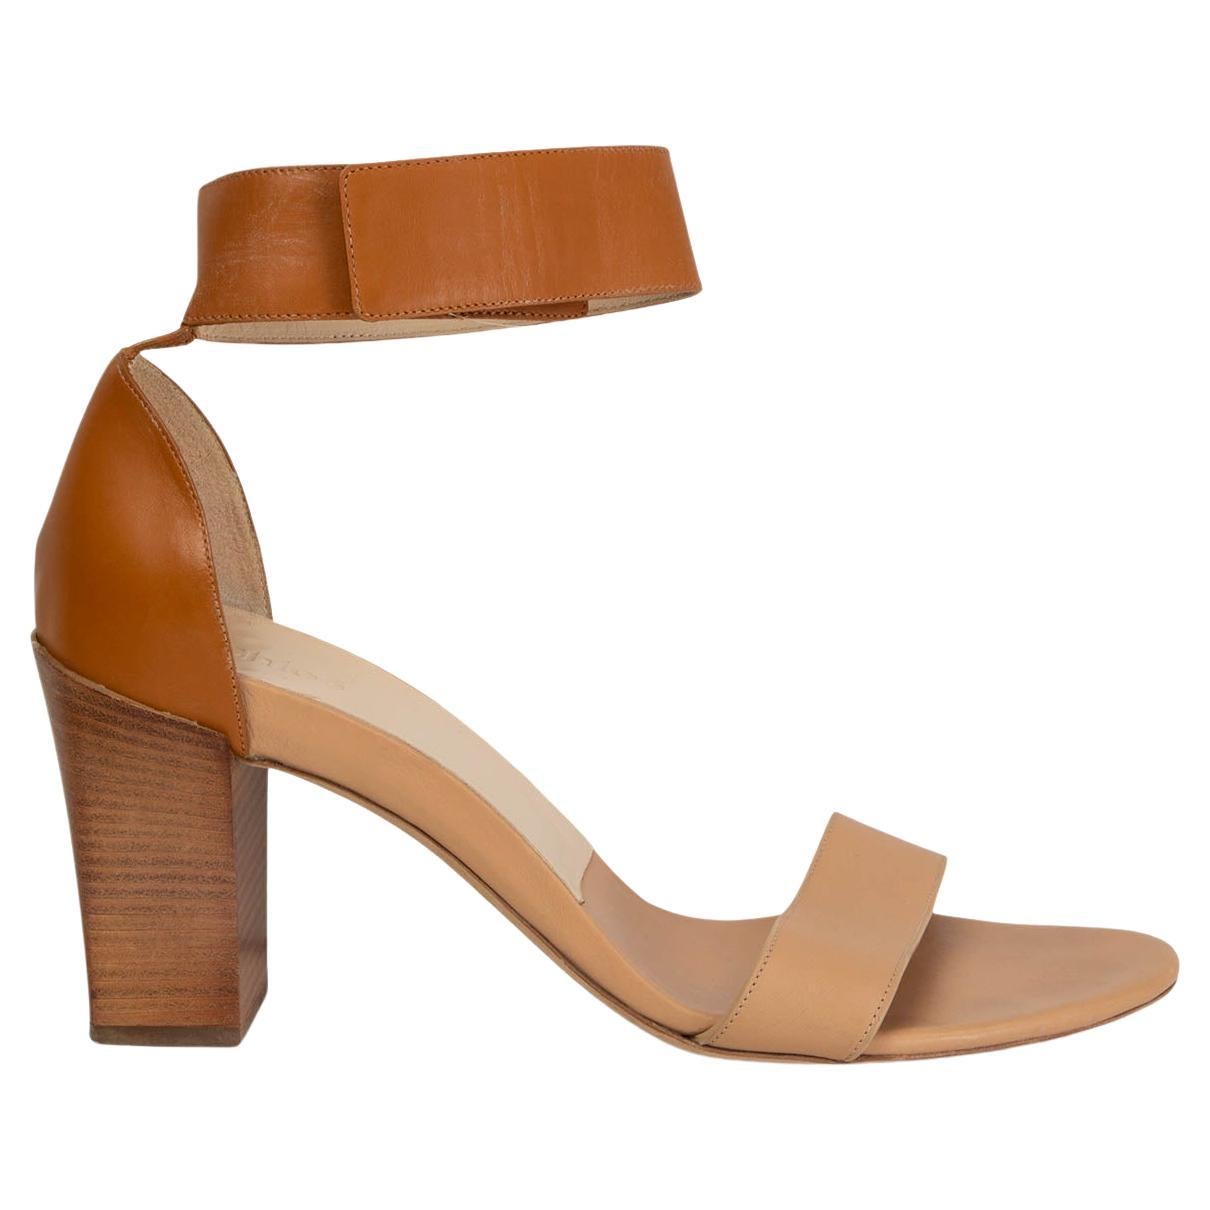 CHLOE beige & nude TWO TONE ANKLE STRAP Sandals Shoes 42 SEAWATER For Sale